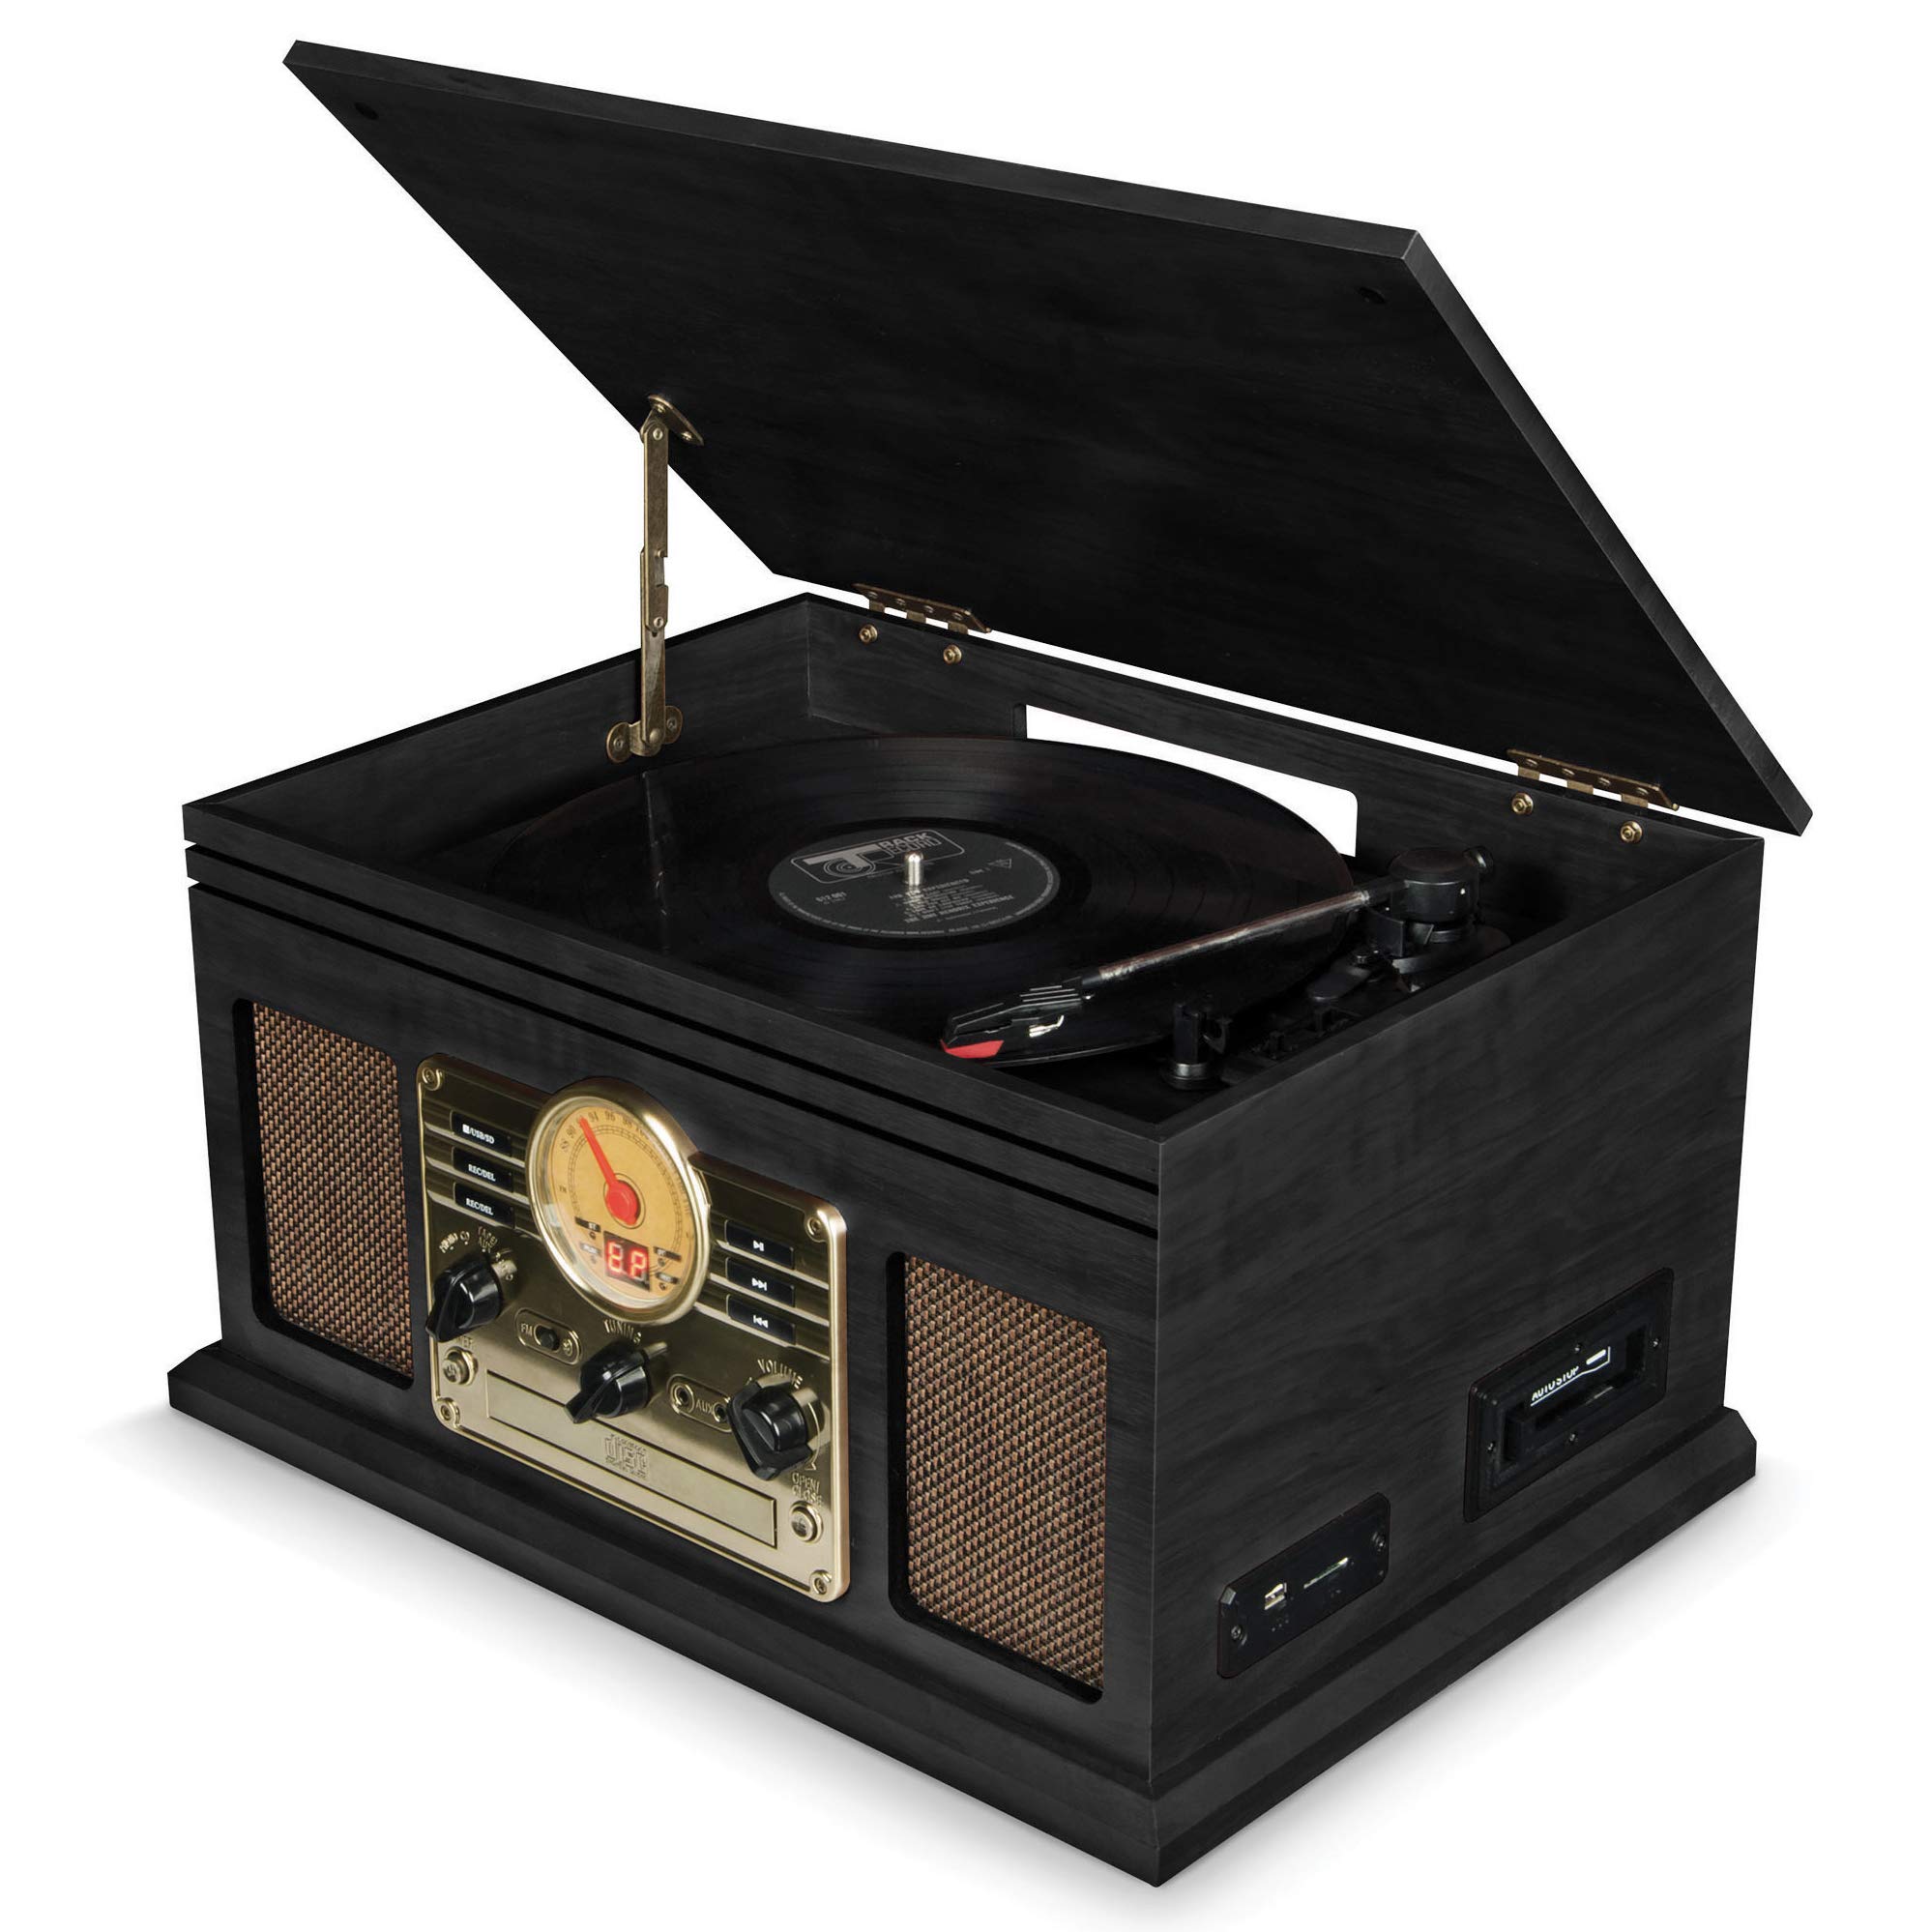 Record Player Vinyl Turntable with Speakers – USB MP3 Playback/Bluetooth/FM Radio/CD & Cassette Player/Vinyl LP Records/SD Card Reader